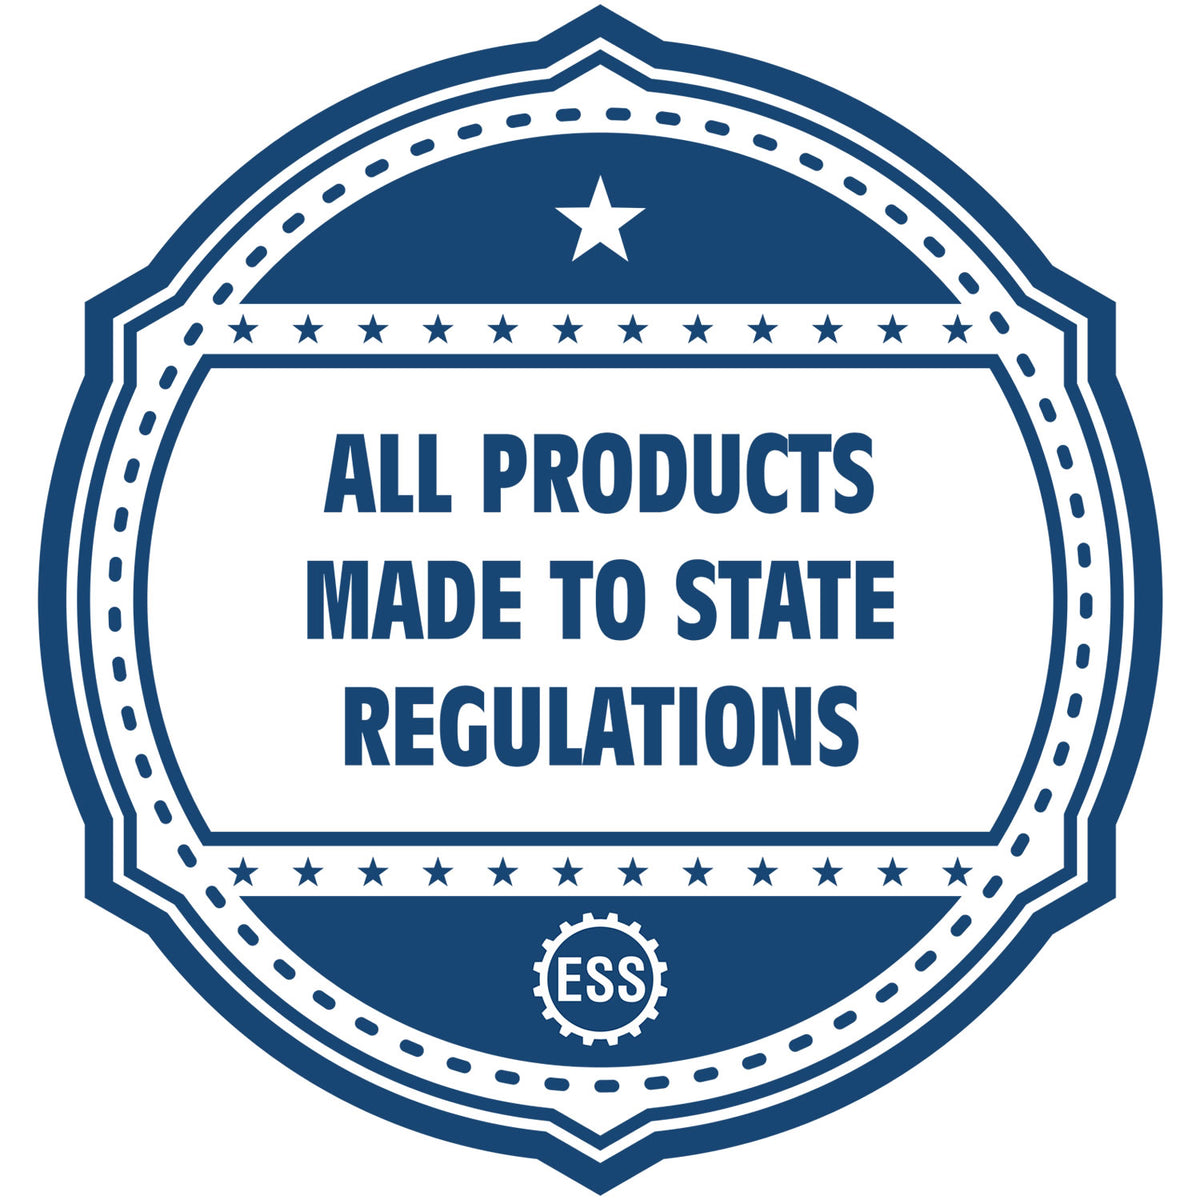 An icon or badge element for the State of West Virginia Long Reach Architectural Embossing Seal showing that this product is made in compliance with state regulations.